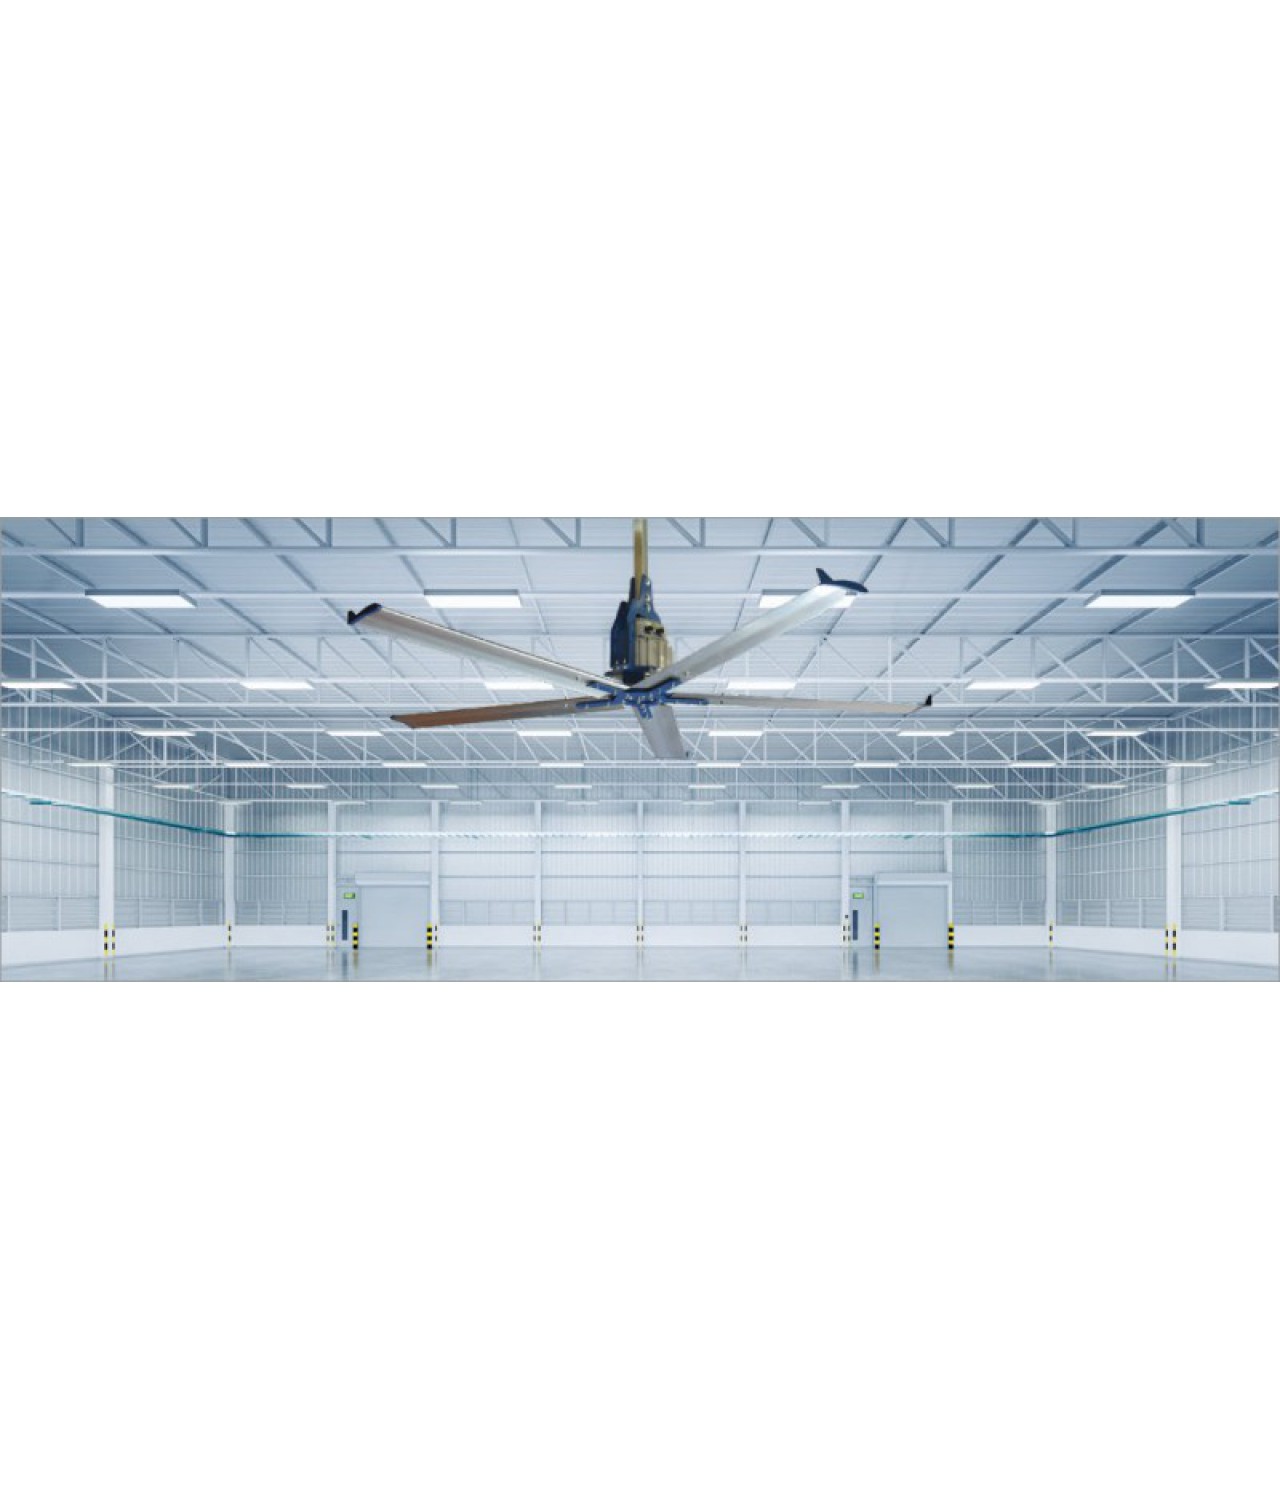 SUPER POLAR HVLS ceiling fan in the warehouse